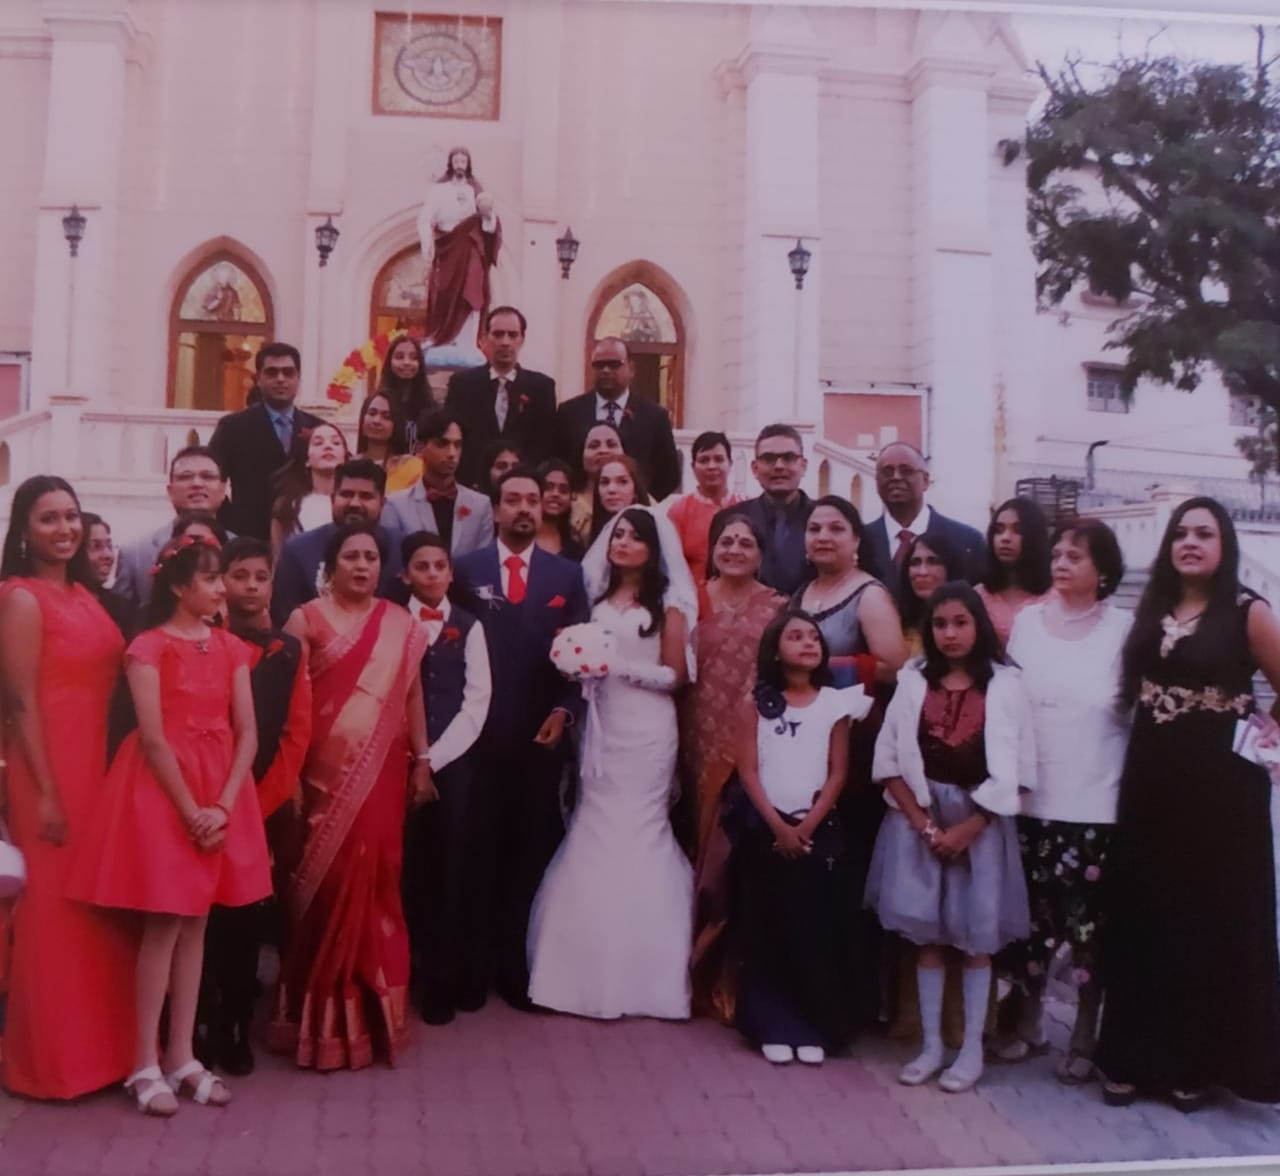 Bidens of India and abroad gathered together for a family wedding in Nagpur in 2018